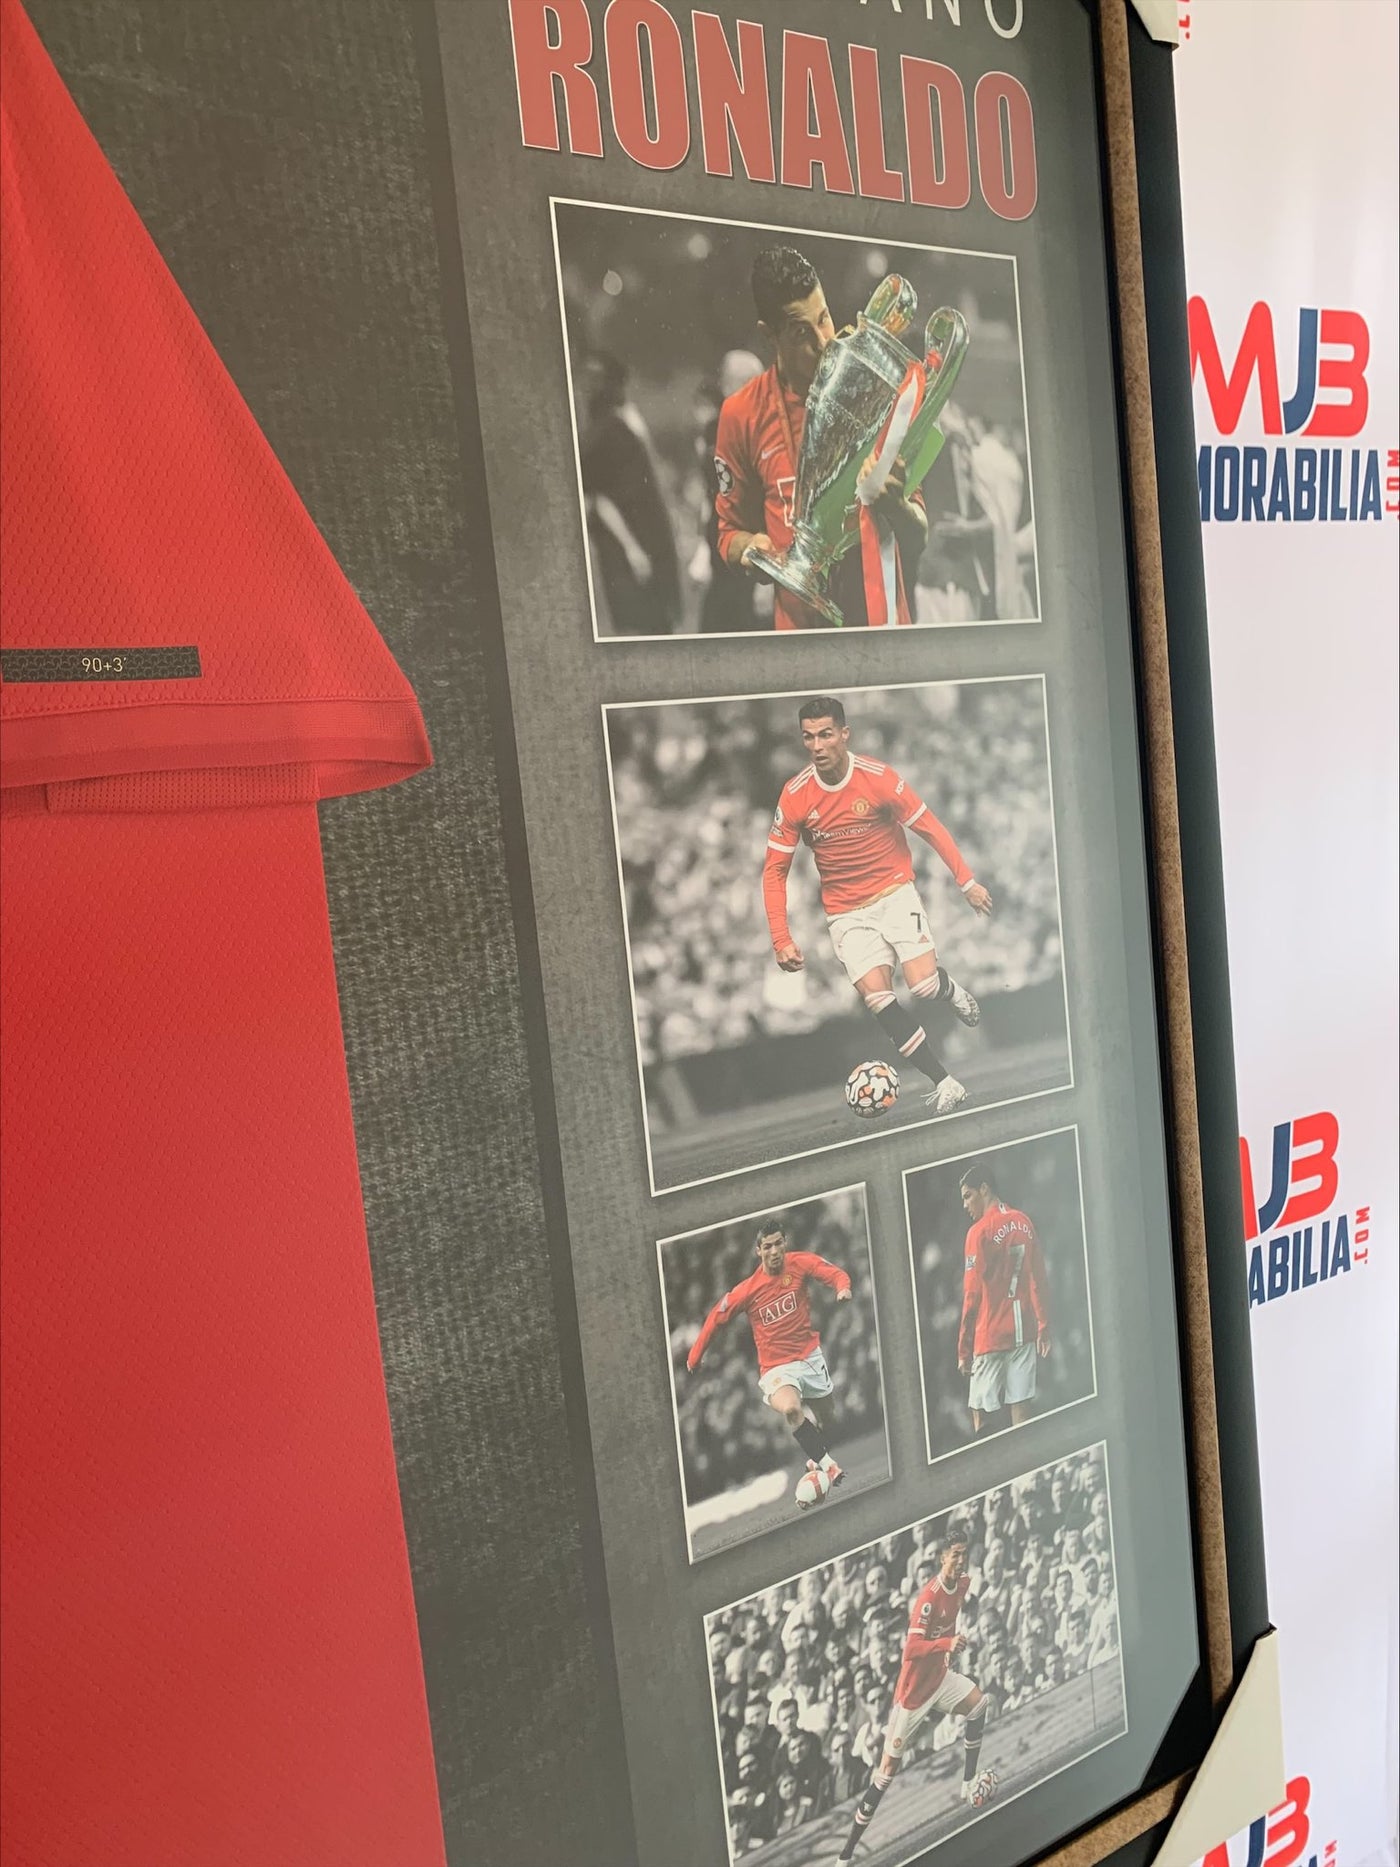 Cristiano Ronaldo Personally Hand Signed Framed Manchester United Jersey with Beckett Authentication